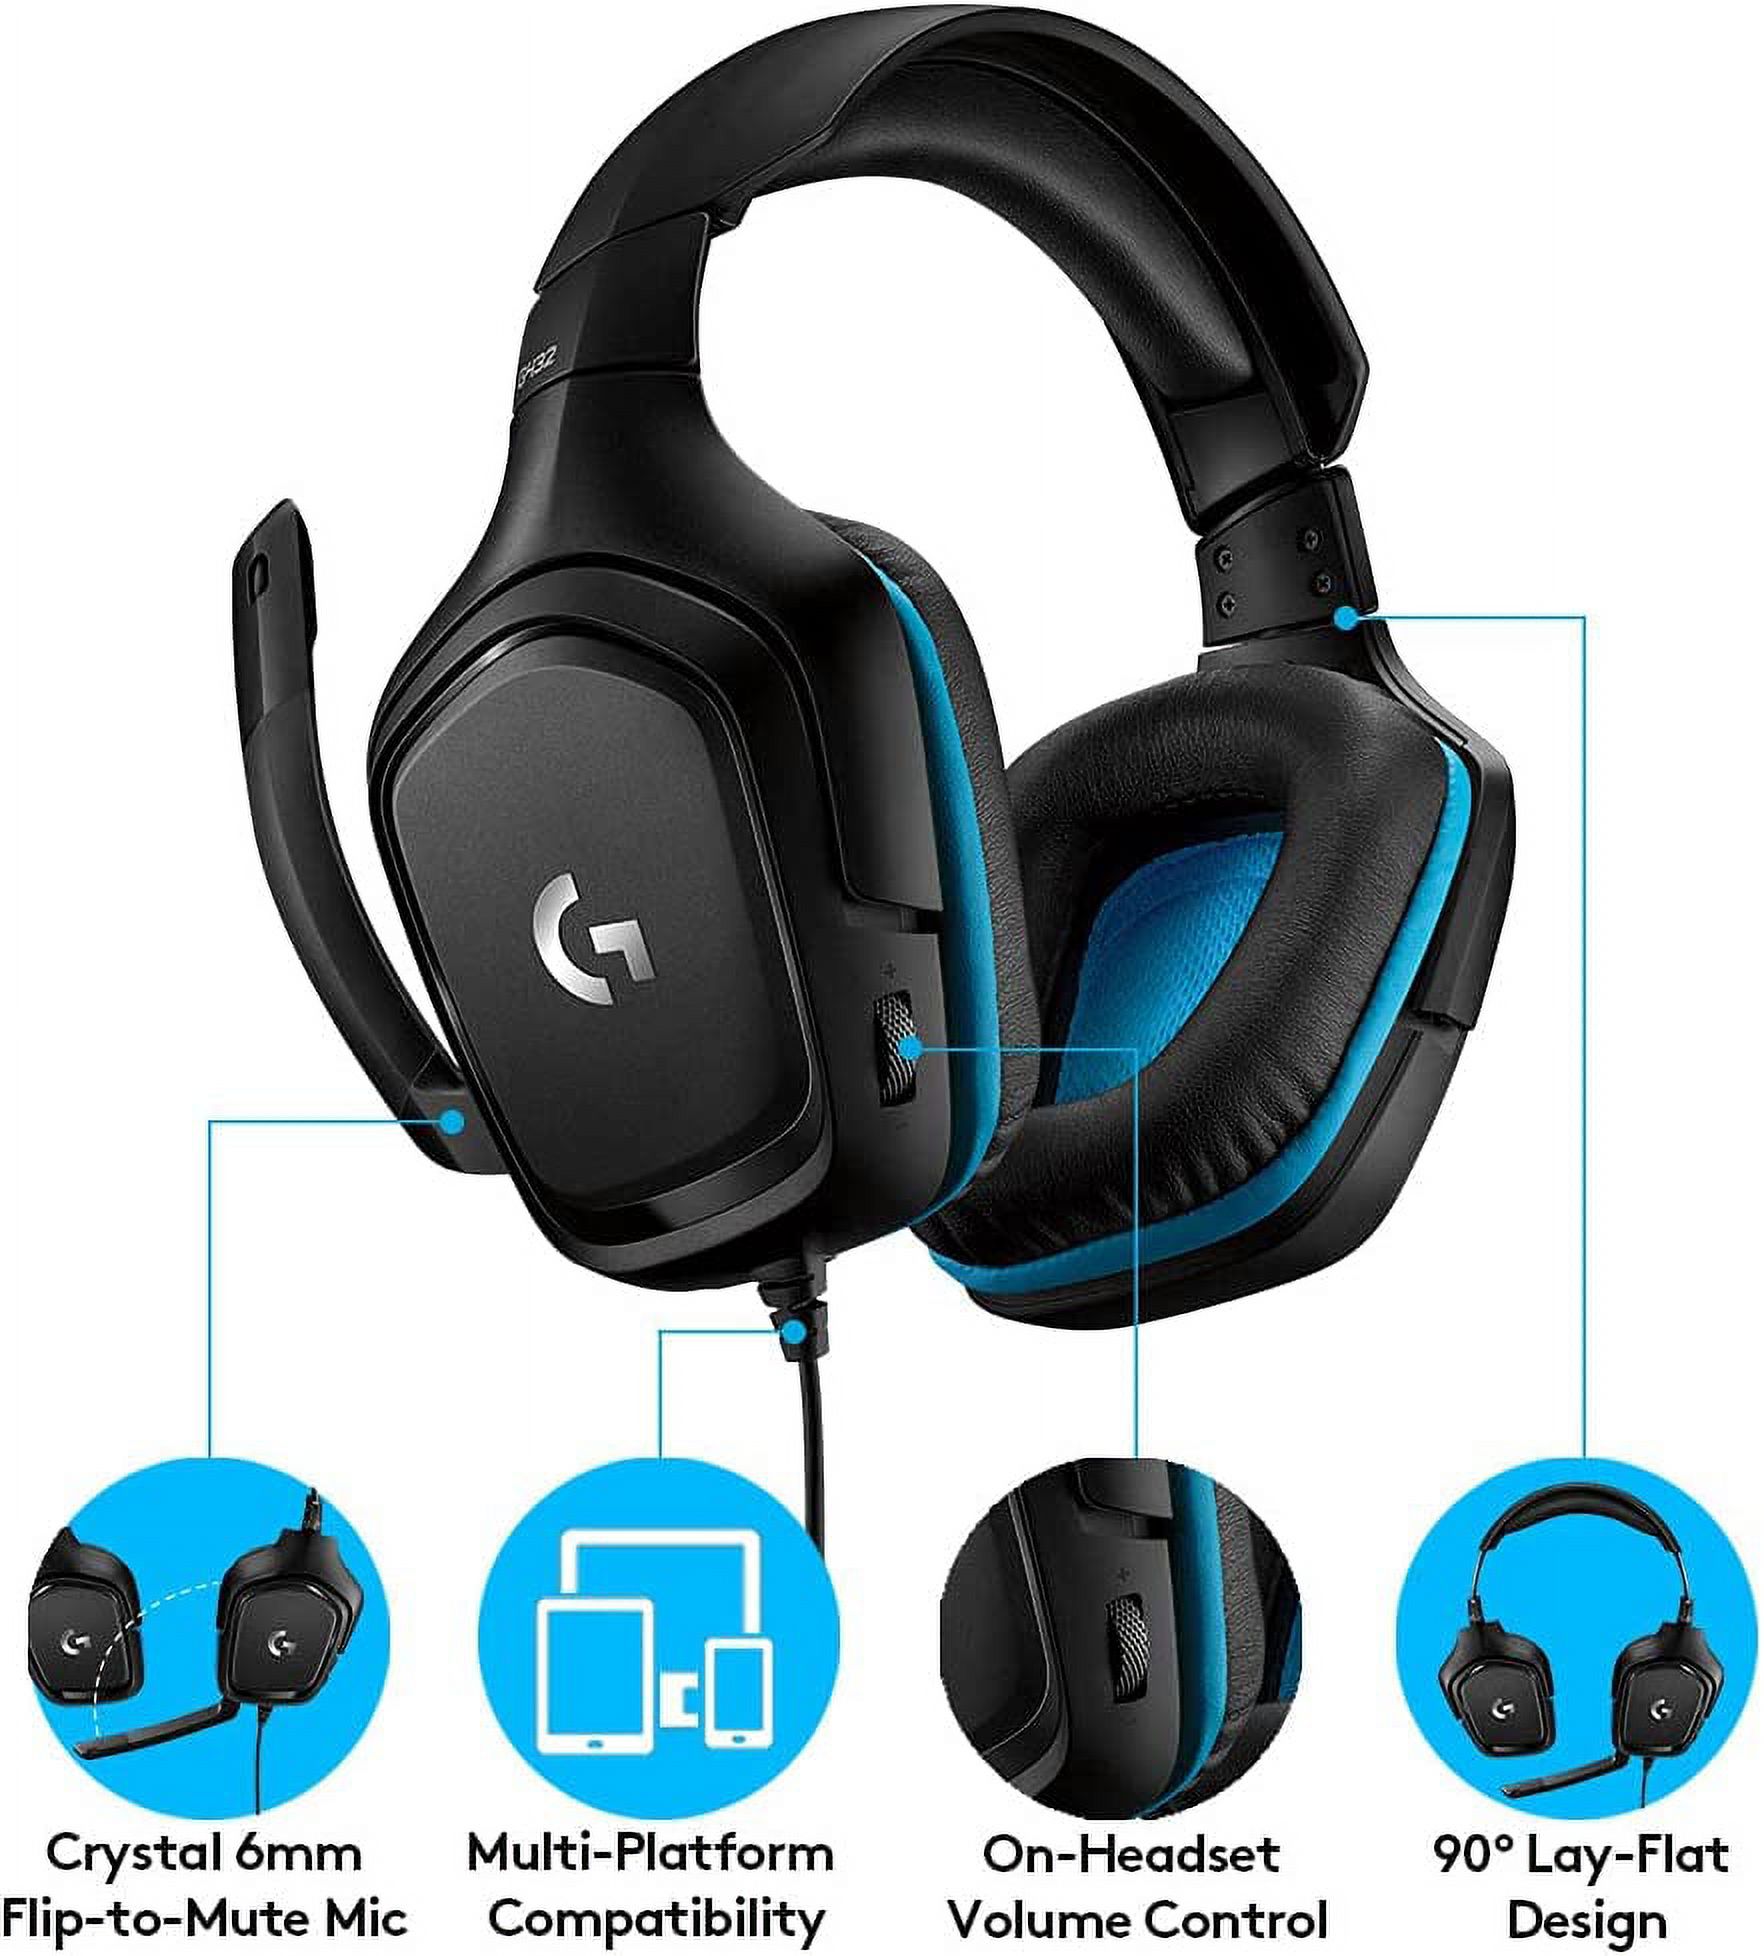 Logitech G432 Wired Gaming Headset, 7.1 Surround Sound, USB and 3.5 mm Jack, Black - image 5 of 7